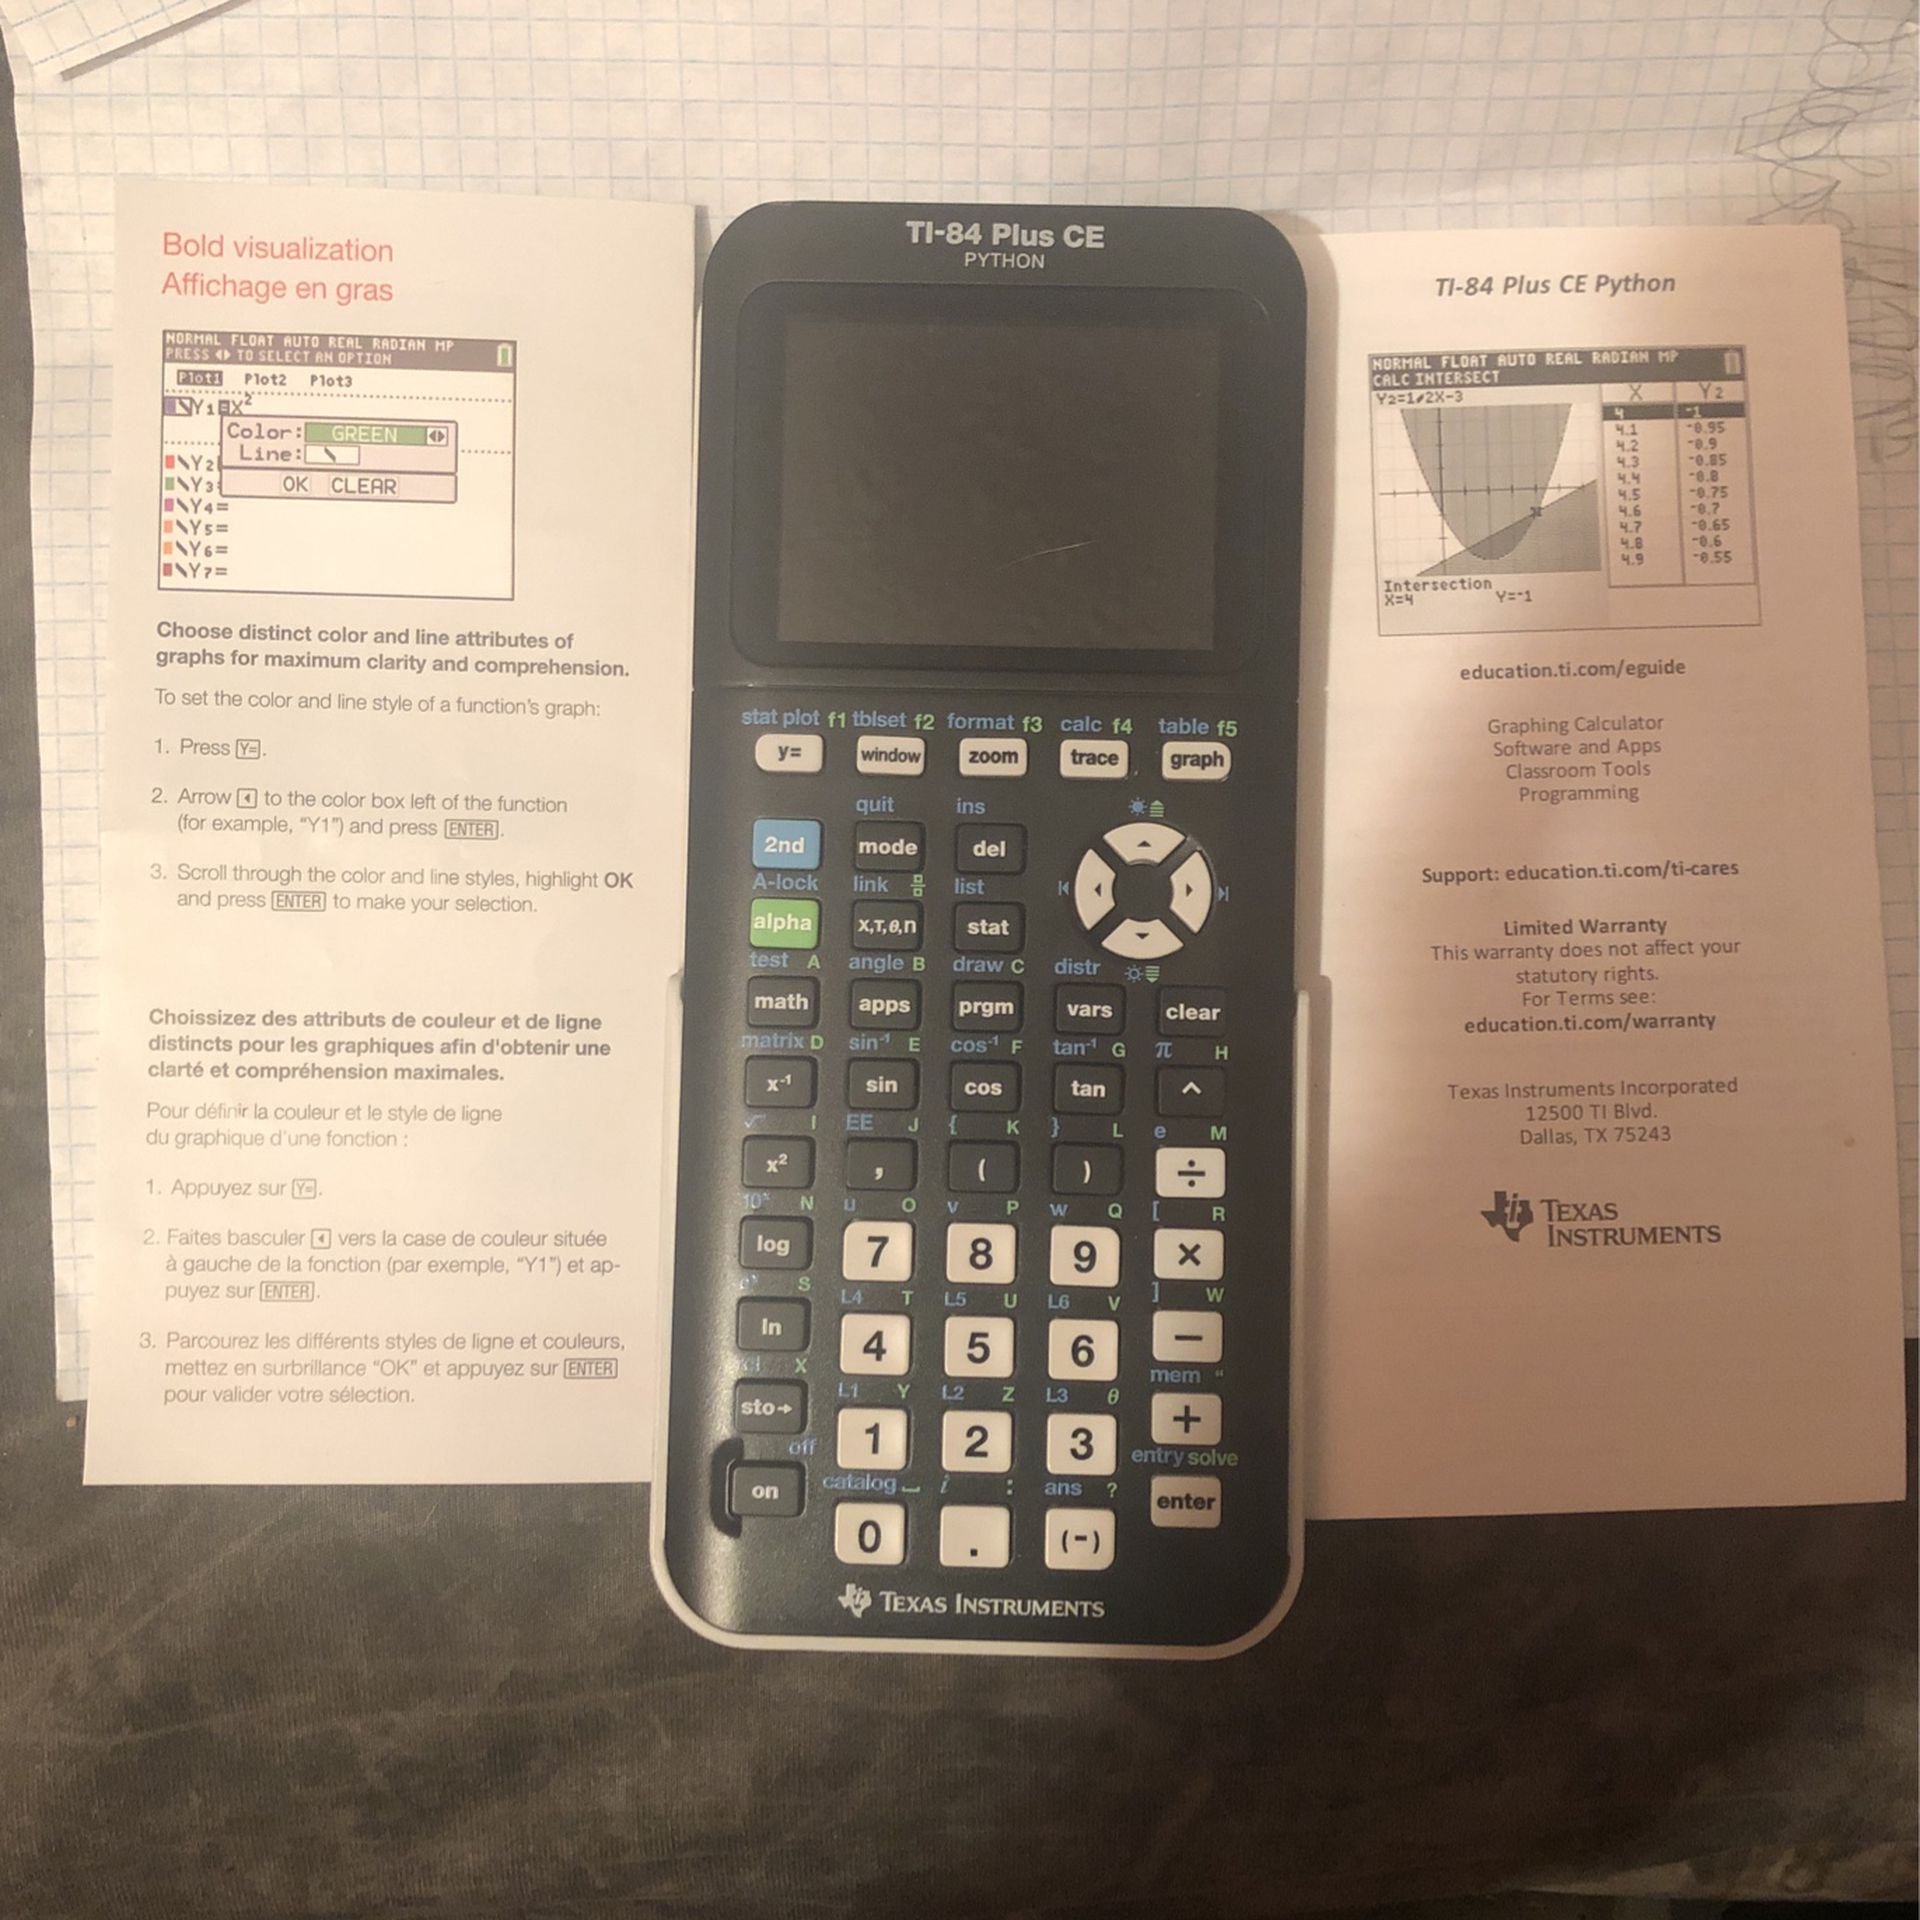 Texas instruments TI-84 Plus CE python Graphing calculator